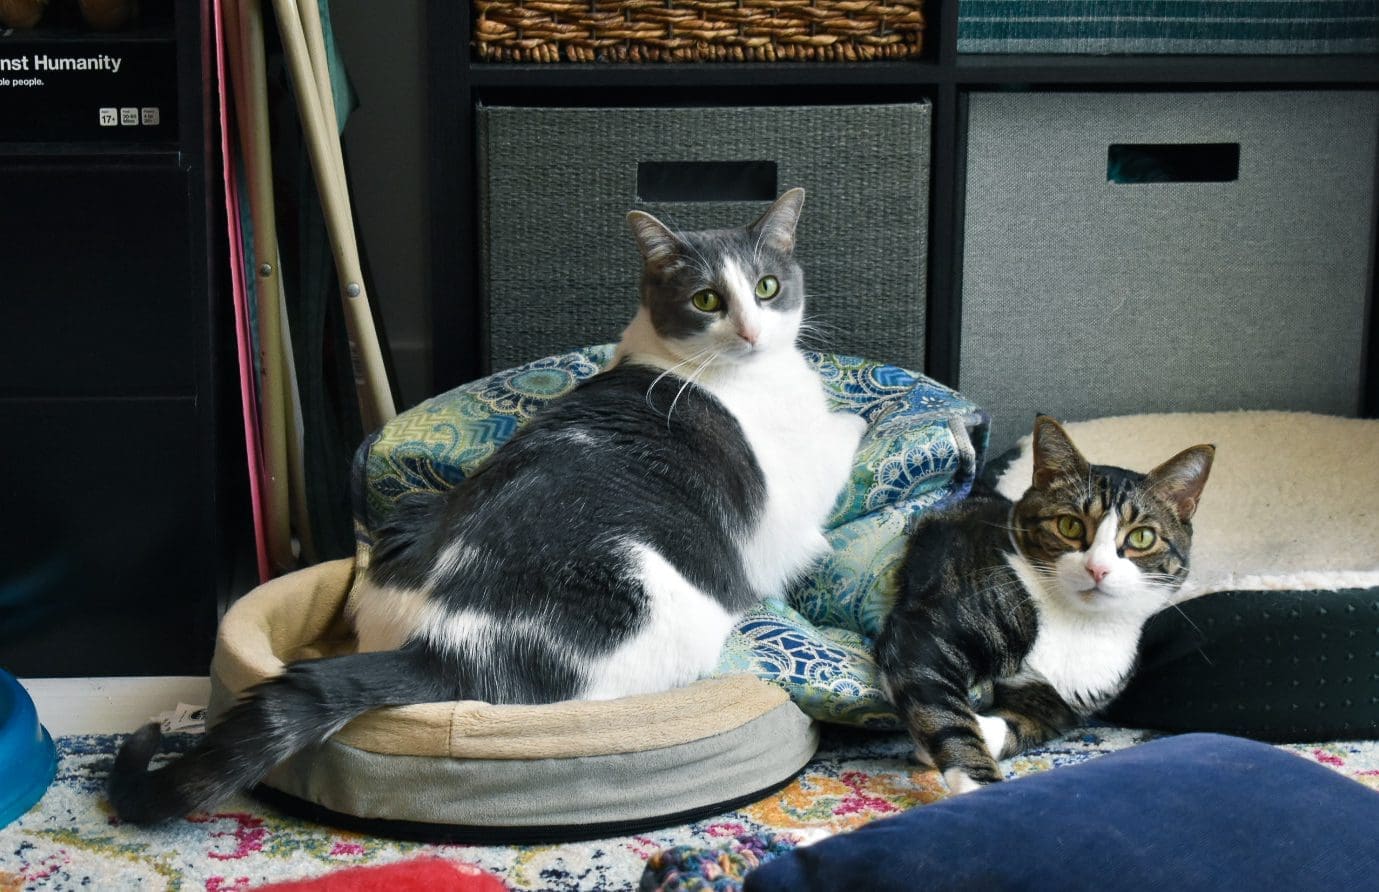 Louis and Emory, tabby cats, with the Cat Ball, their favorite heated bed, and the memory foam bed